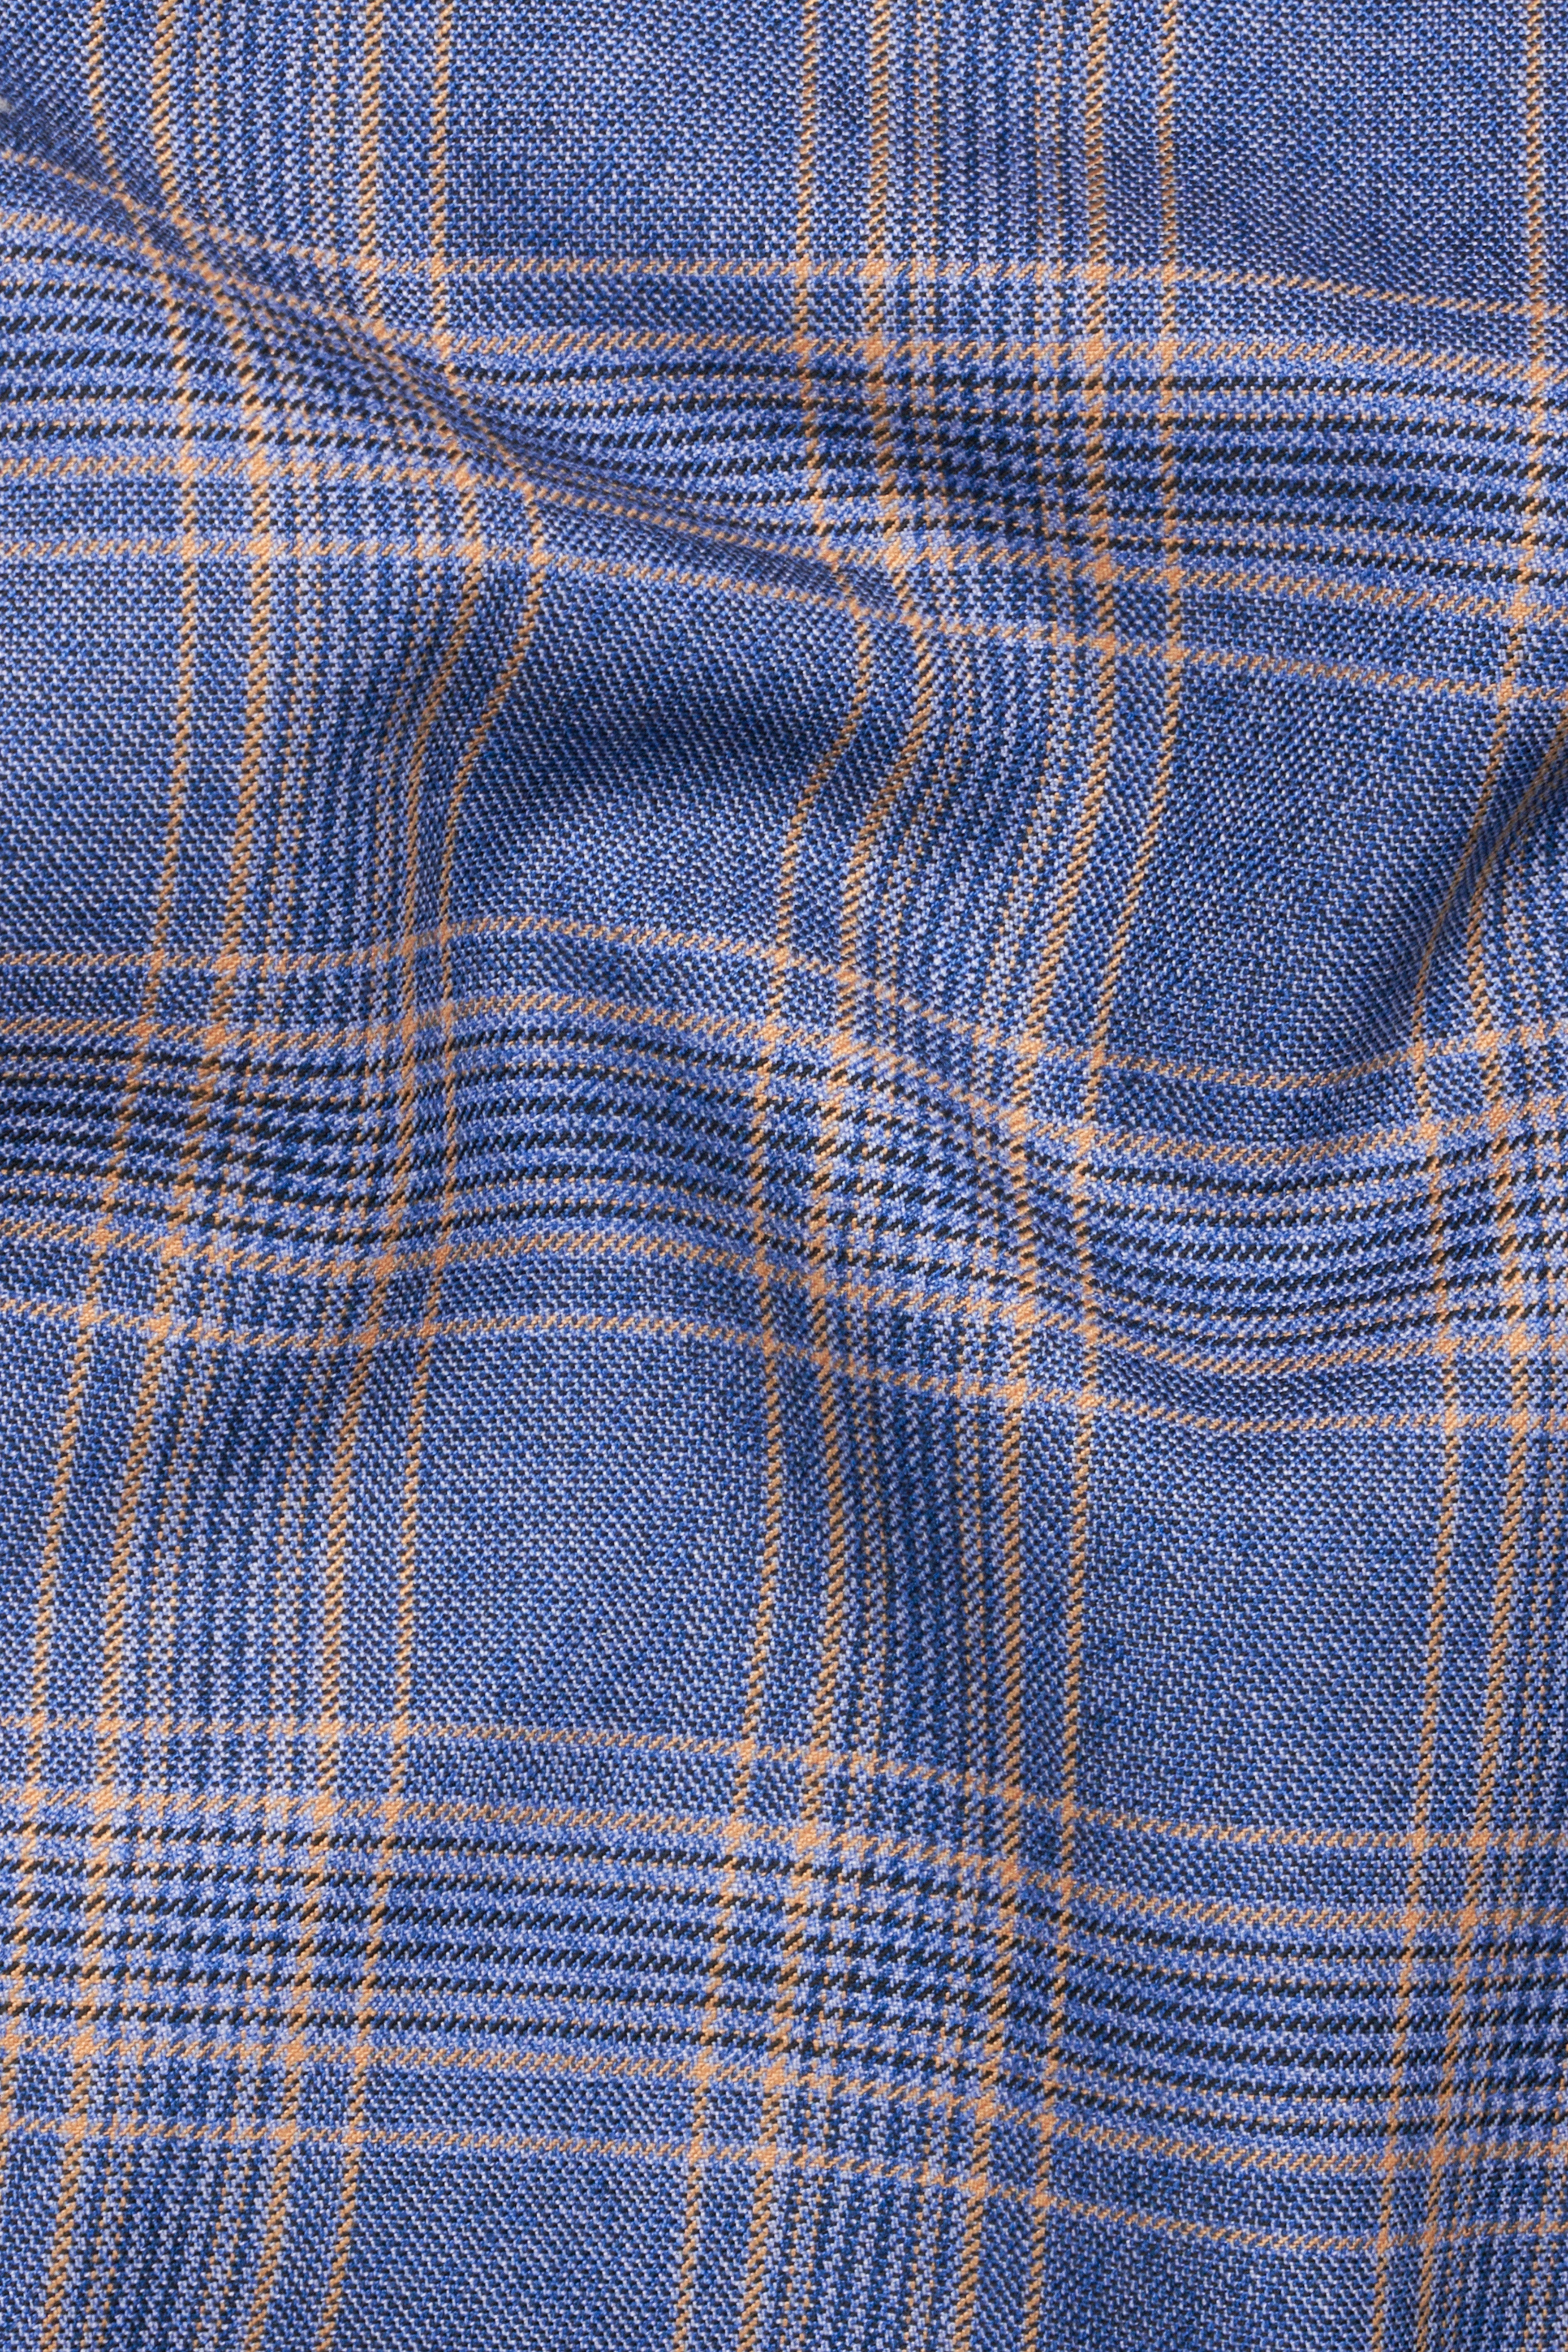 Scampi Blue and Muesli Brown Plaid Wool Rich Nehru Jacket WC2771-36, WC2771-38, WC2771-40, WC2771-42, WC2771-44, WC2771-46, WC2771-48, WC2771-50, WC2771-52, WC2771-54, WC2771-56, WC2771-58, WC2771-60